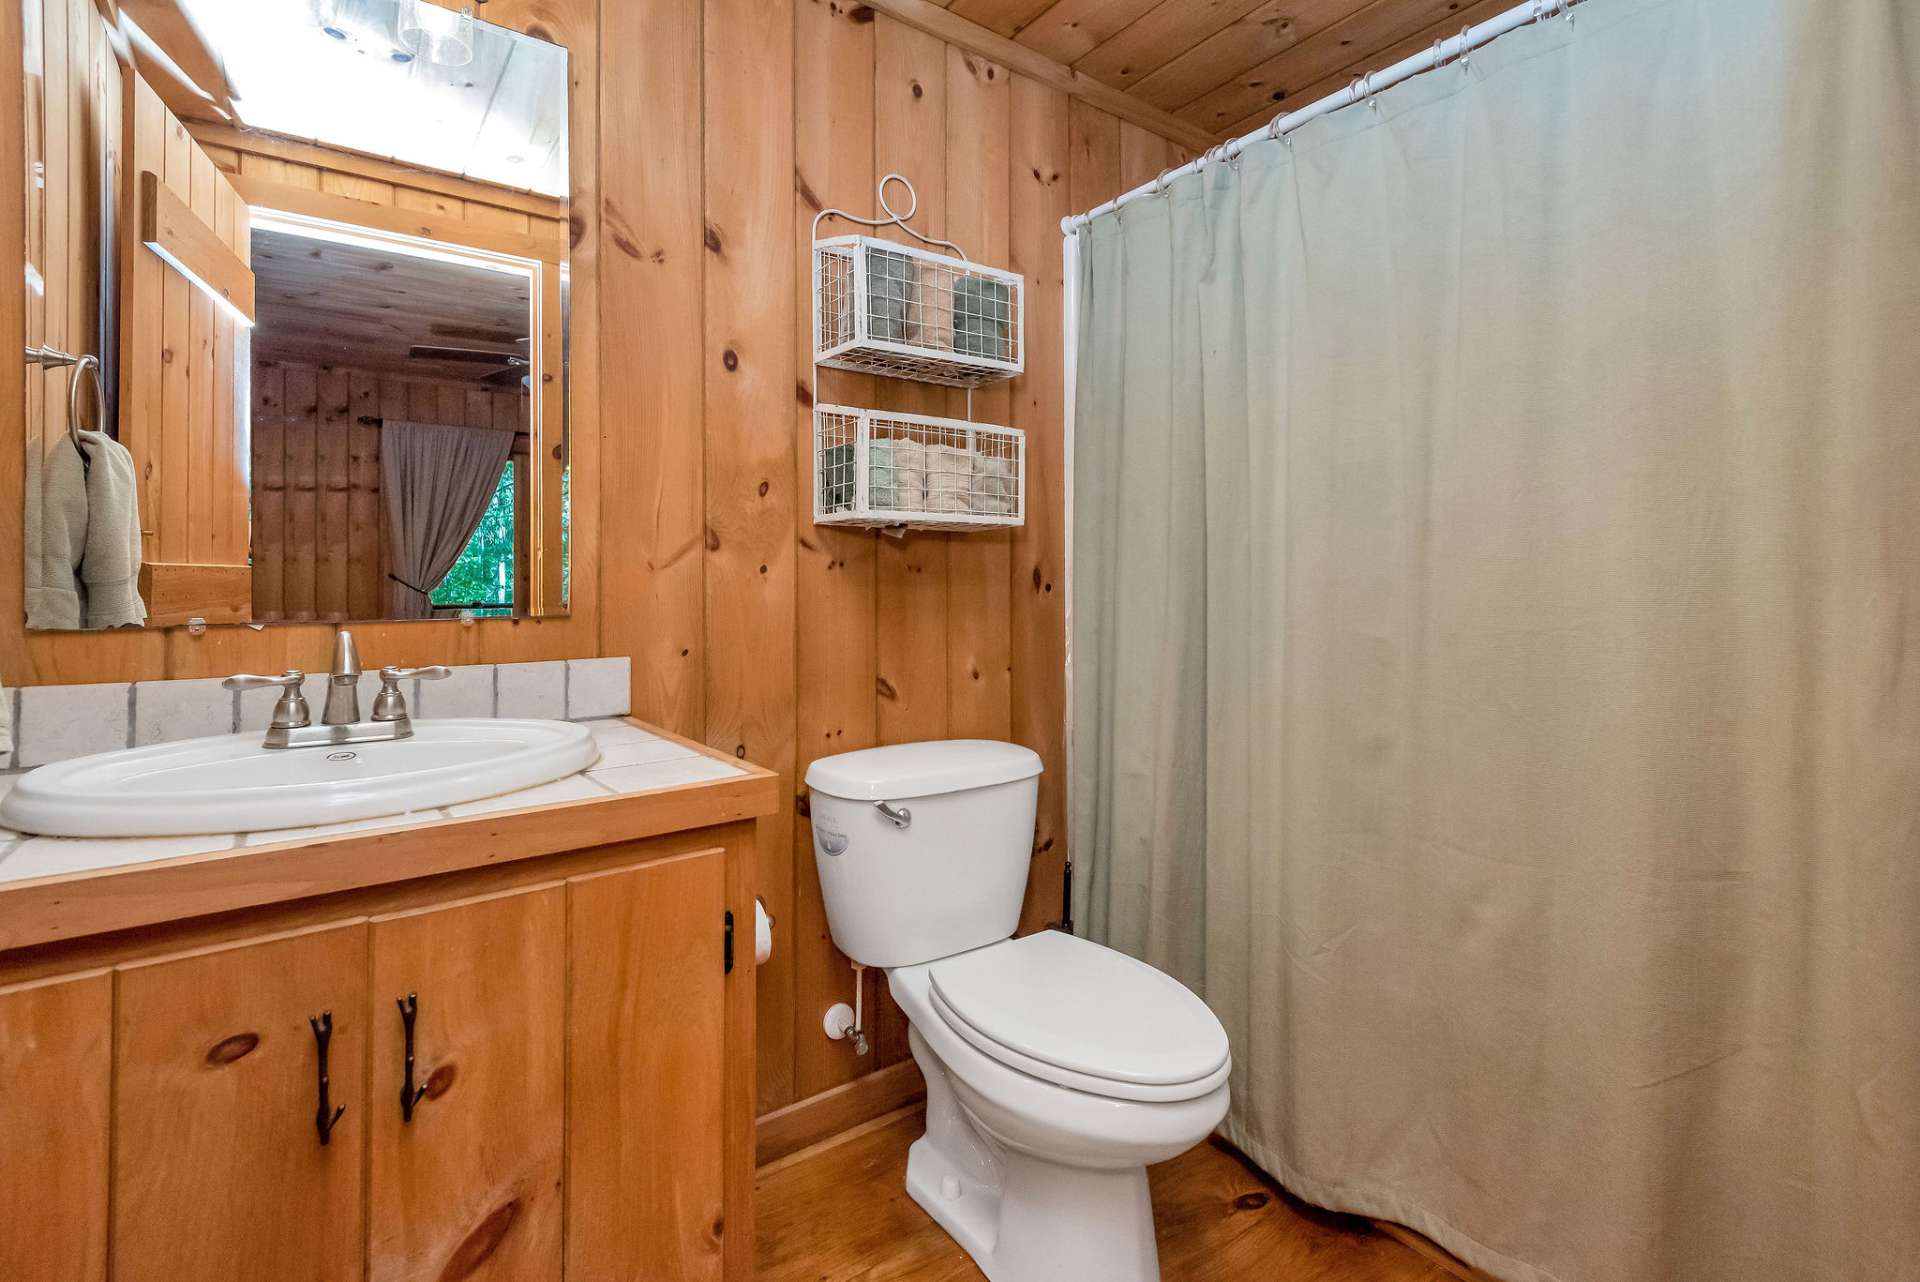 A third full bath complements the family room.